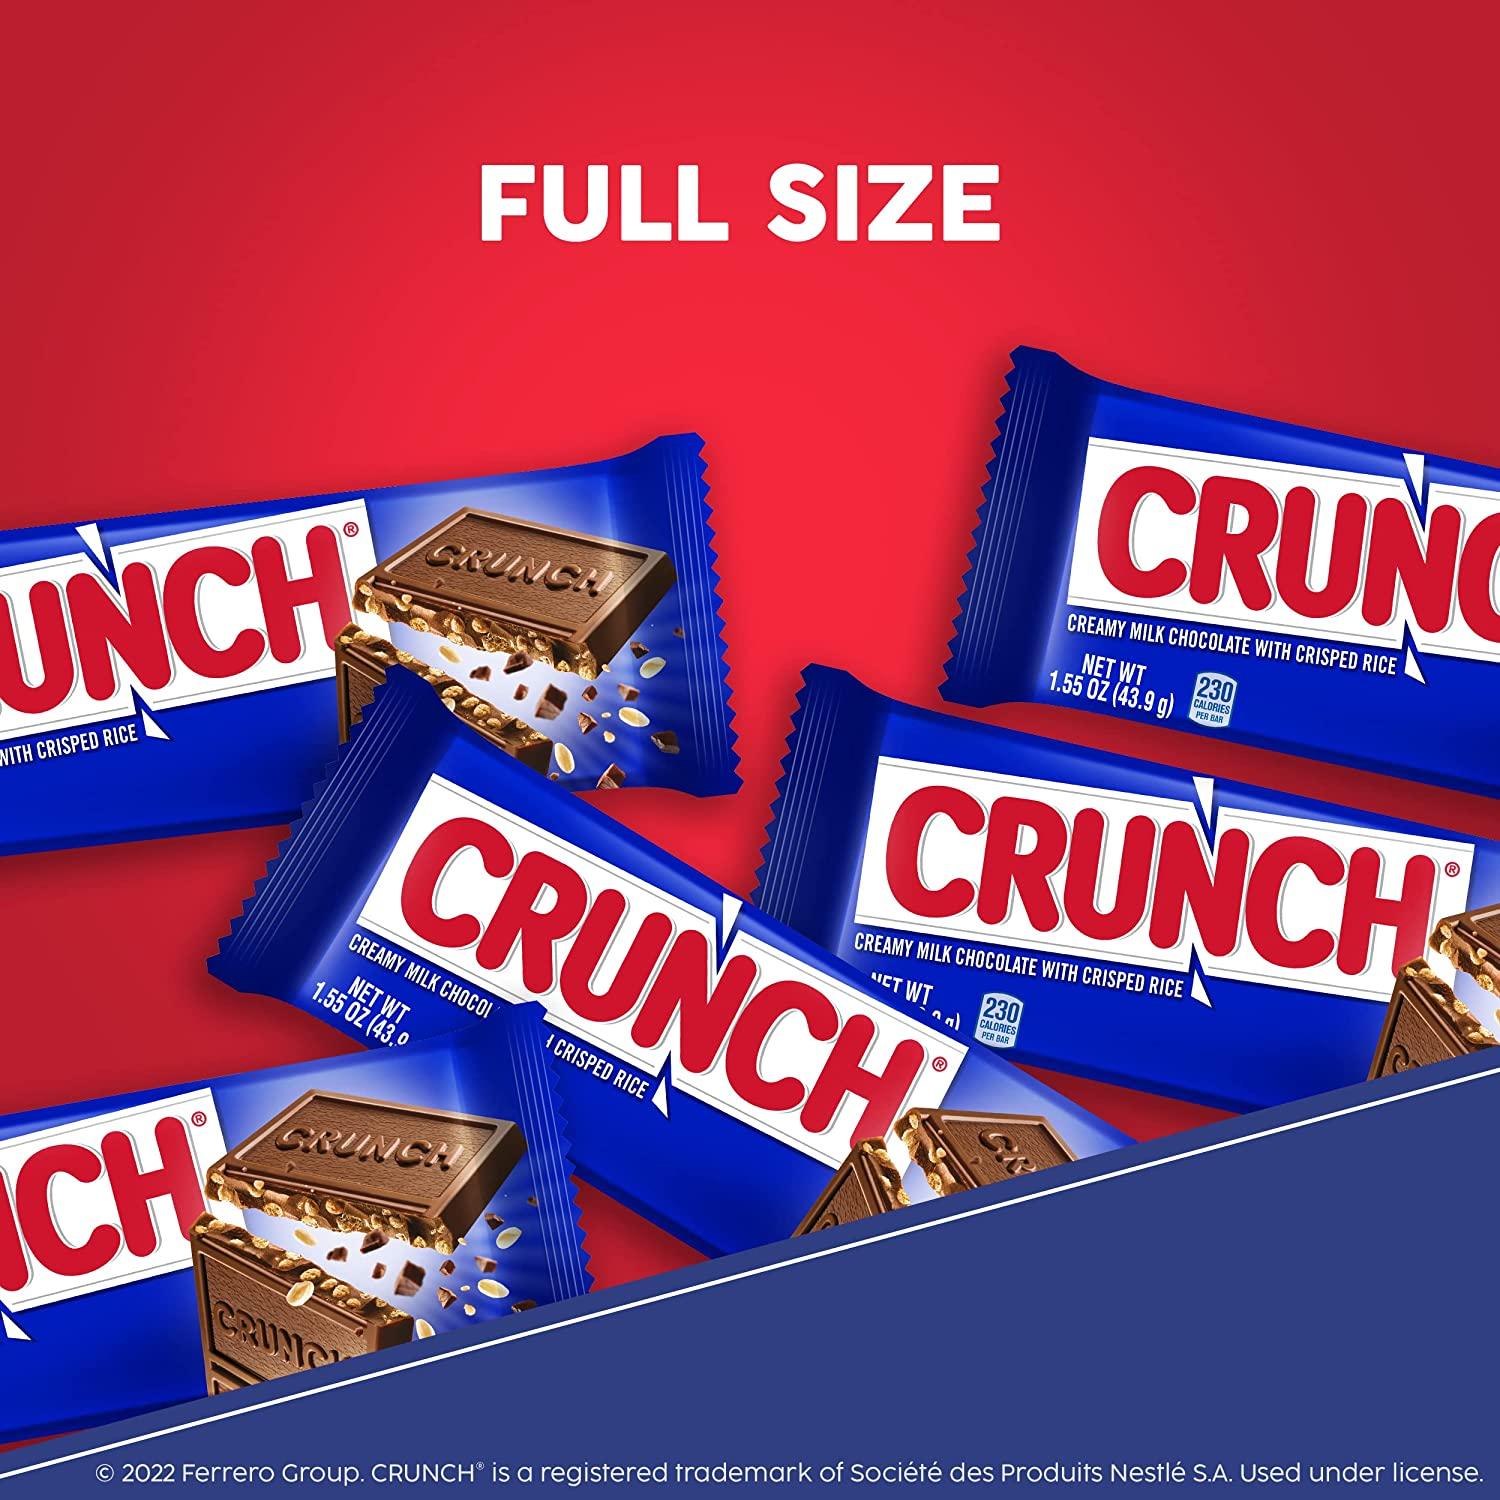 CRUNCH, Milk Chocolate And Crisped Rice, Full Size Individually Wrapped  Candy Bars, Great For Halloween Candy,  Oz, 36 Count 36 Count(Pack of 1)